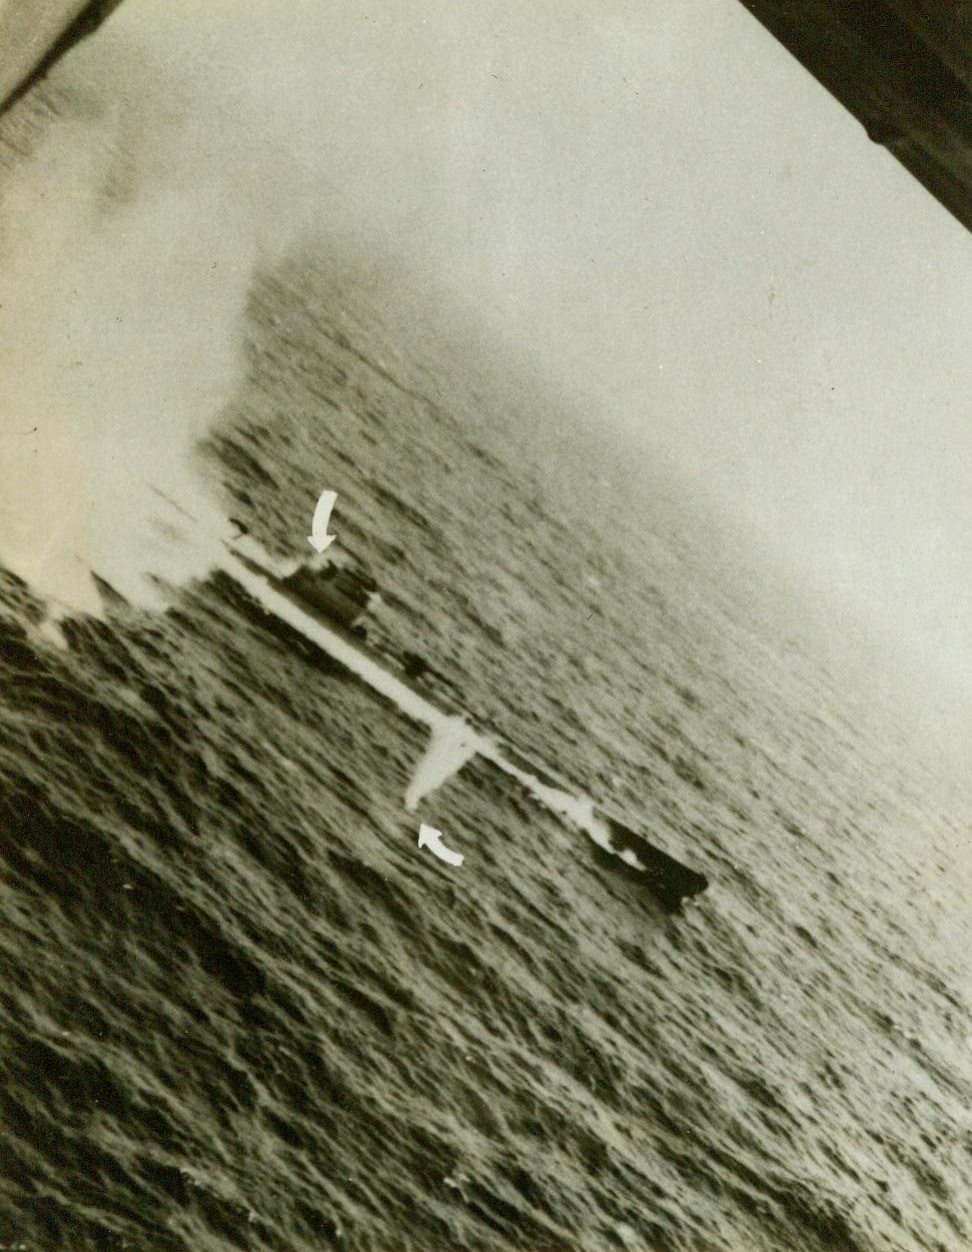 ”Tidewater Tillie” Scores Again – (#1), 5/25/1943. The crew of a specially equipped Liberator B-24 Bomber of the U.S. Army Air Forces Anti-Submarine Command made this photo of a successful attack on a Nazi U-Boat, proving they had scored a “kill”. Once before they had attacked an enemy sub and had been given credit for only a “Probable”, because their photos hadn’t shown conclusively that the undersea boat was destroyed. This time, photos of the attack, and of the wreckage on the surface after the attack made the “kill” a certainty. Here, the B-24 comes in on its bomb run over the sub, its machine guns blazing. Arrow, (at left), shows a Nazi crew member hit and dropping to the deck, after an American bullet had scored a hit. Another machine gun bullet splashes into the sea, (arrow at right). A few seconds later, depth bombs from the plane blasted the sub to the bottom.  Credit line (U.S. Army Air Forces Photo);